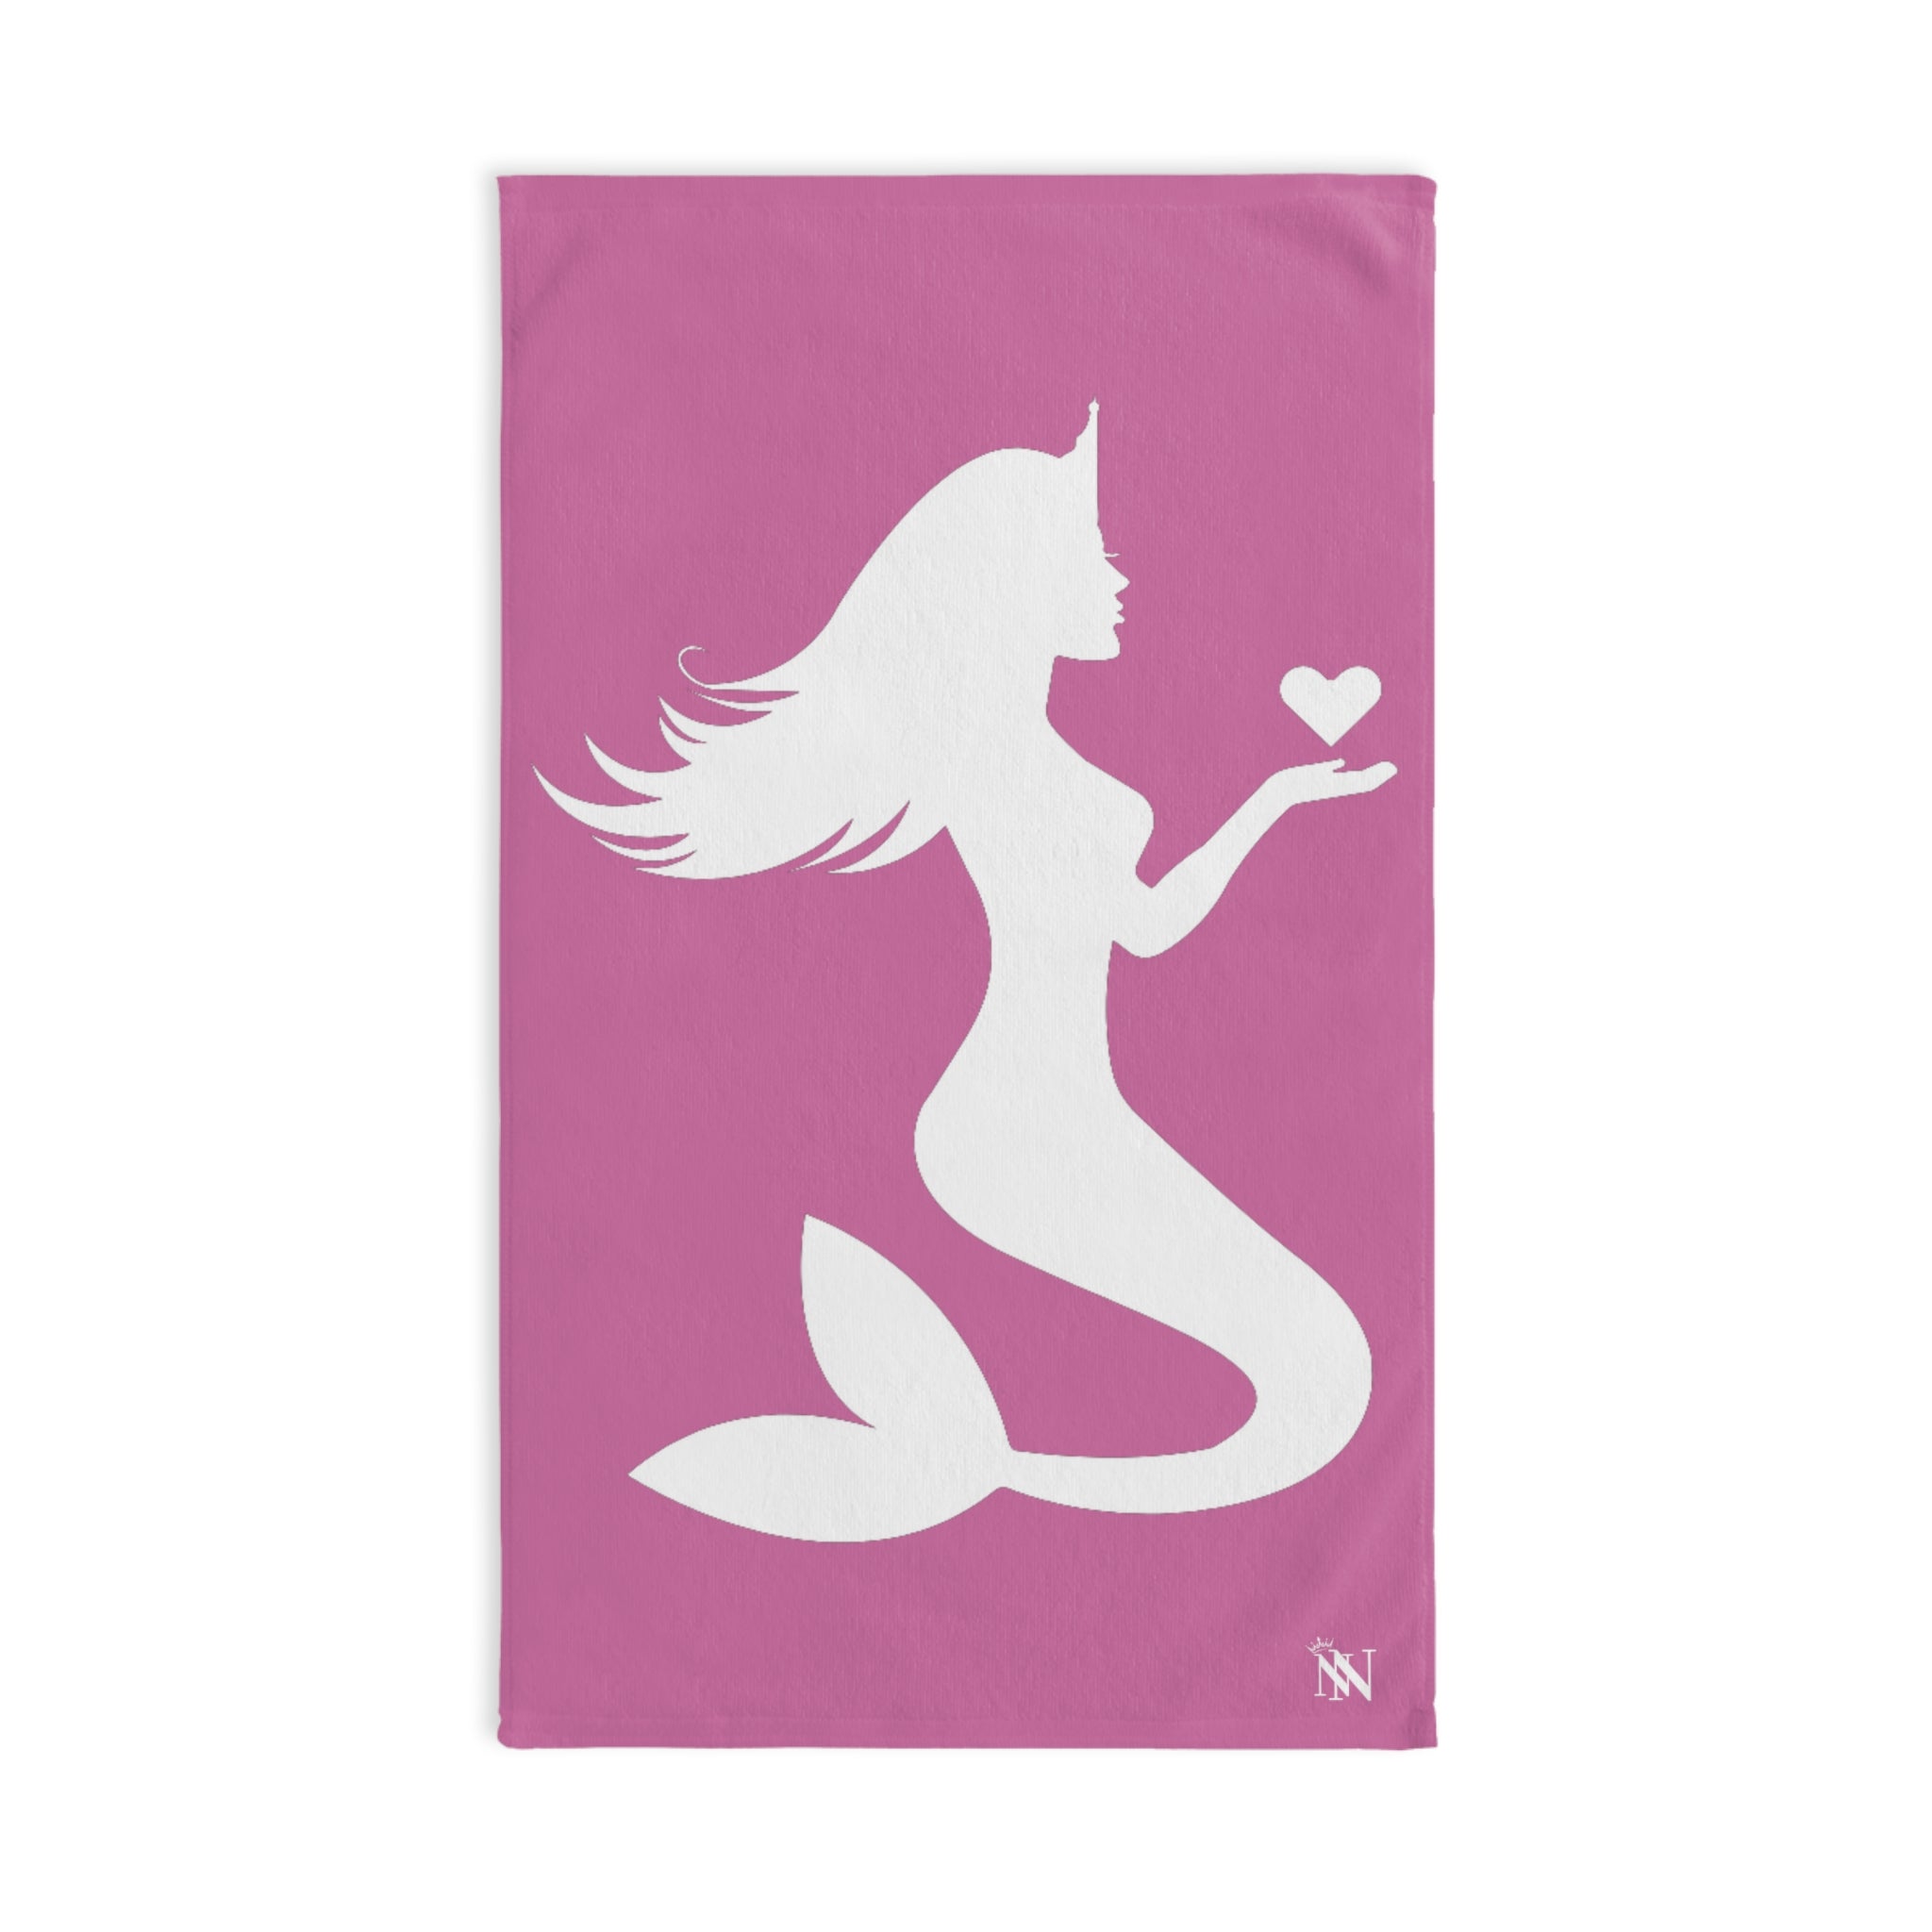 Pray Mermaid HeartPink | Novelty Gifts for Boyfriend, Funny Towel Romantic Gift for Wedding Couple Fiance First Year Anniversary Valentines, Party Gag Gifts, Joke Humor Cloth for Husband Men BF NECTAR NAPKINS